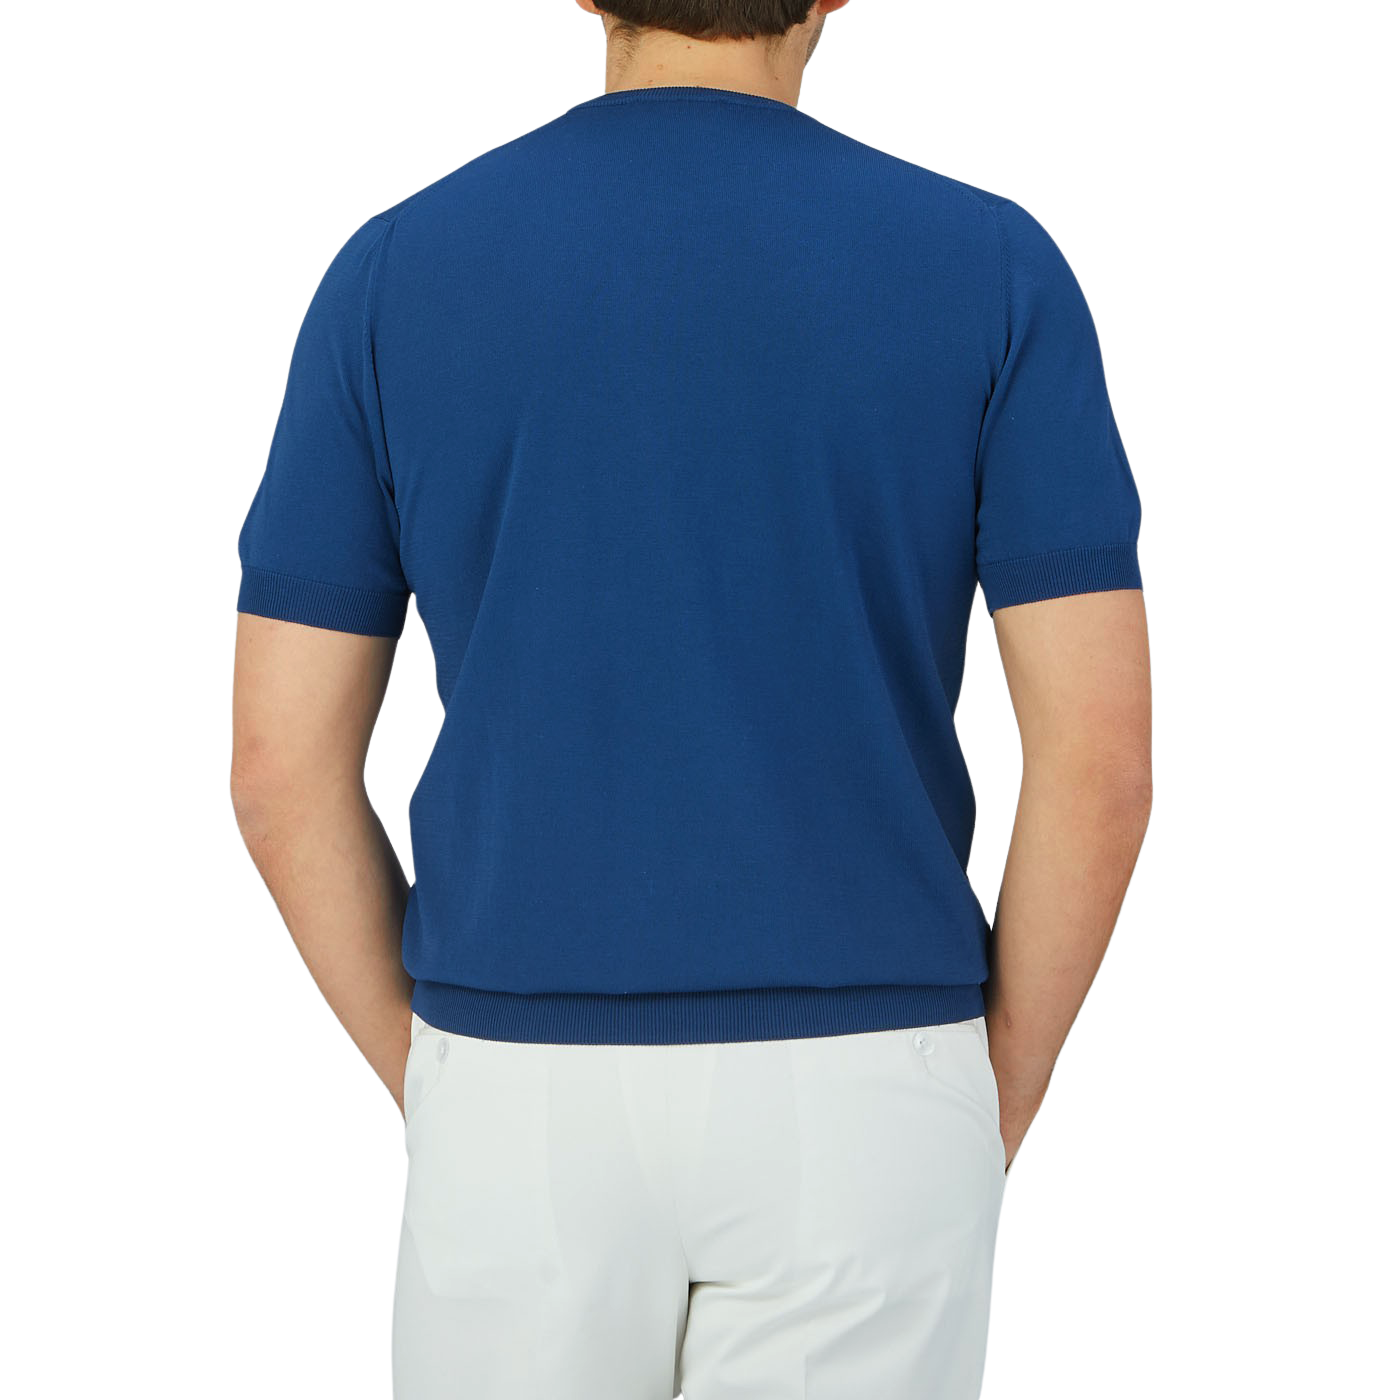 The back view of a man wearing a lightweight, Gran Sasso Indigo Blue Knitted Organic Cotton T-Shirt and white pants.